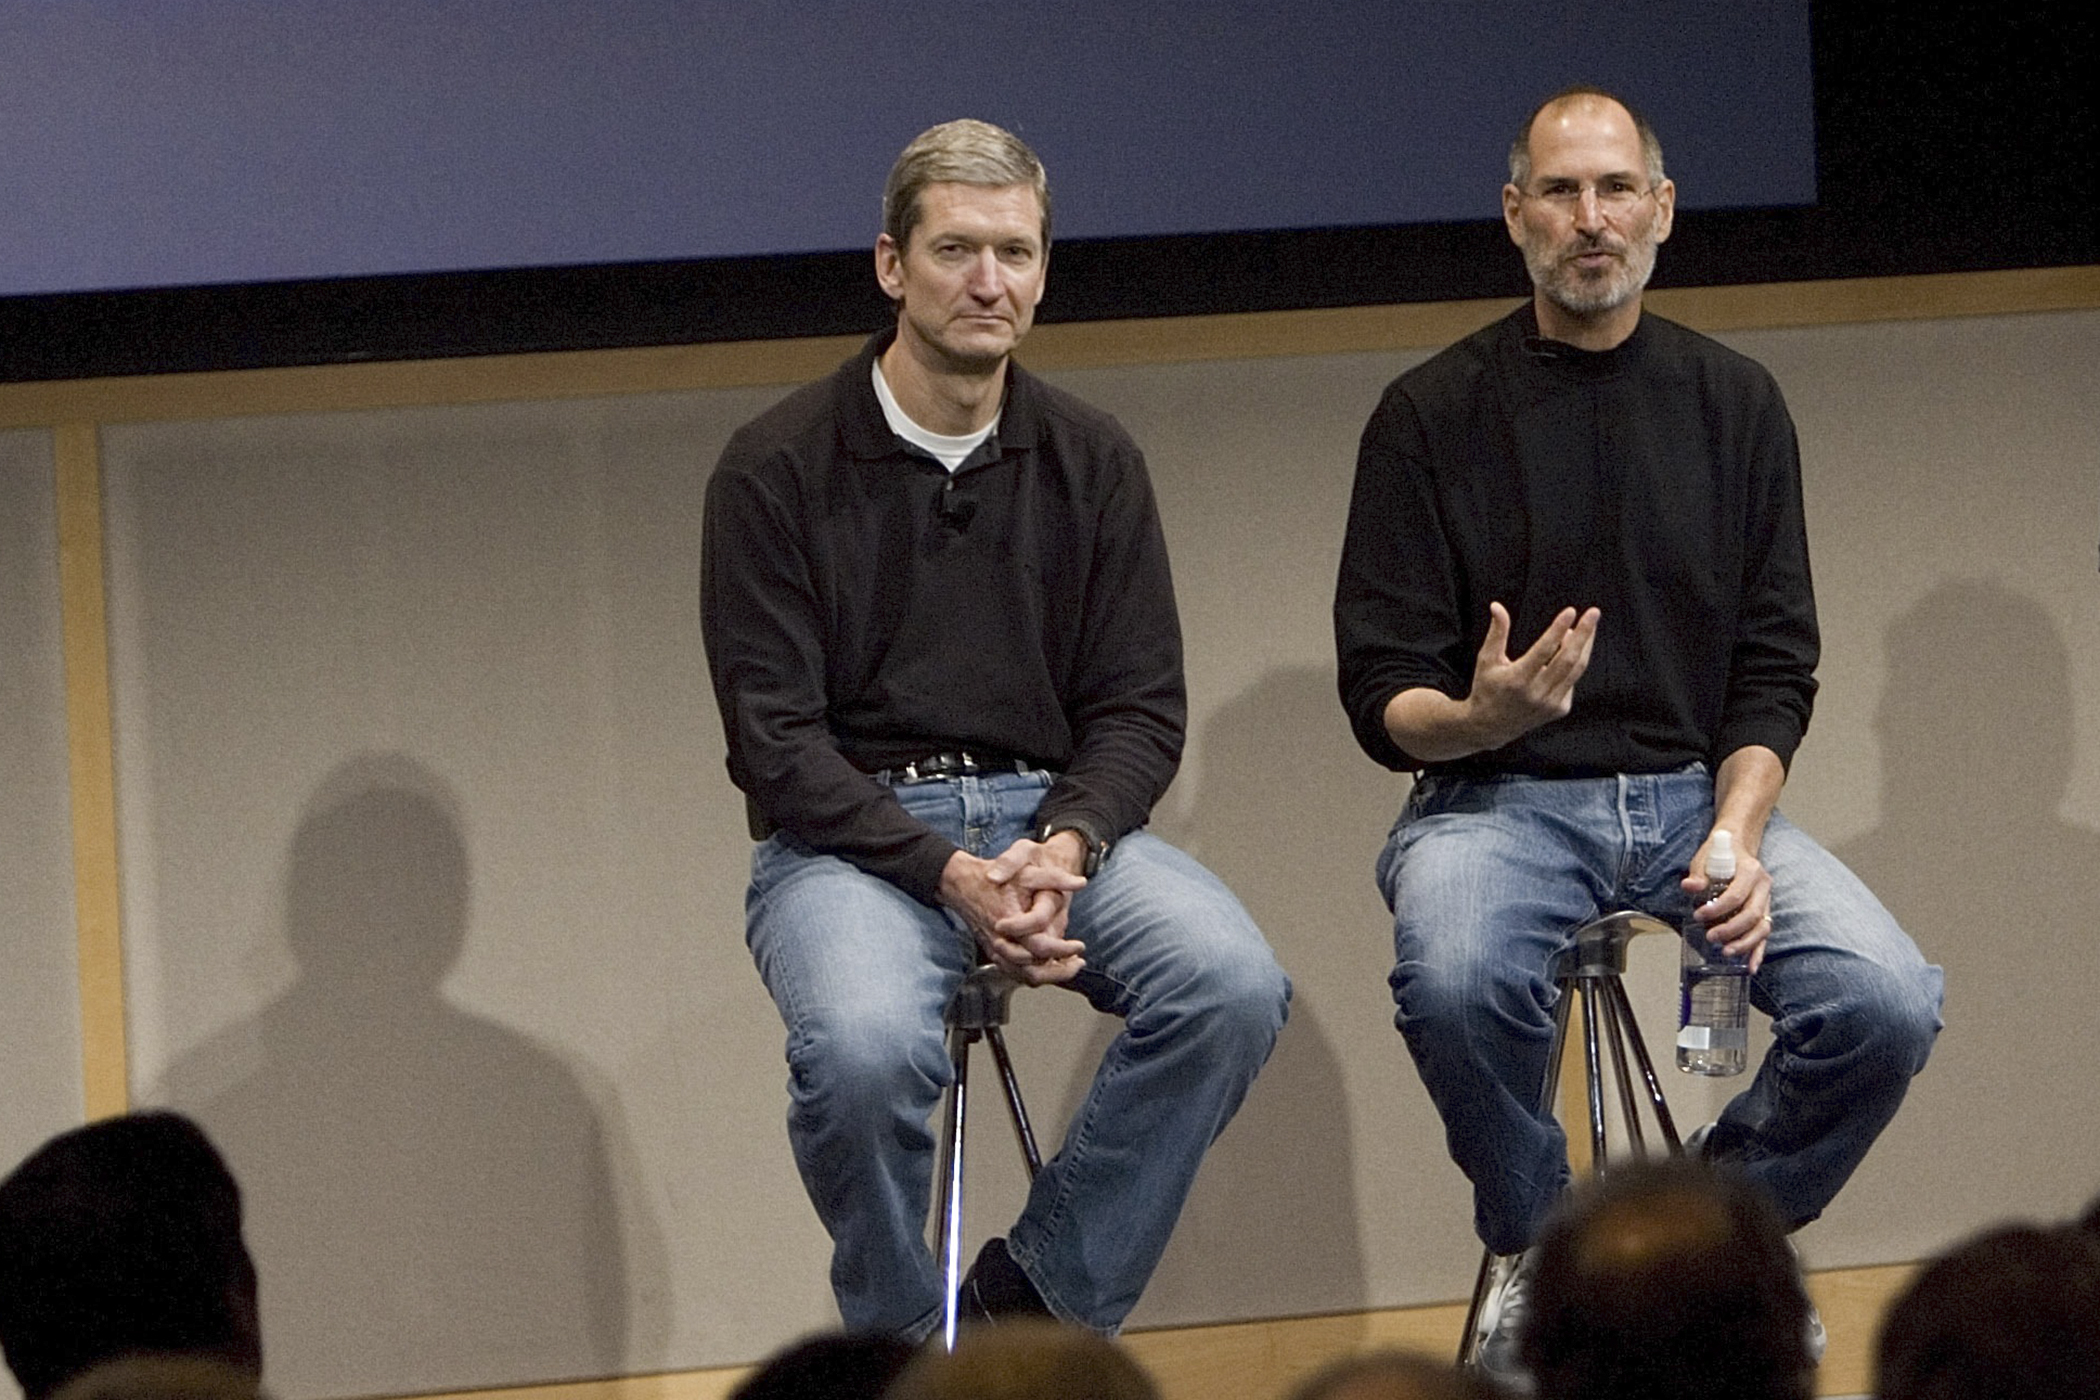 C(L-R) Tim Cook, Chief Operating Officer, Apple CEO Steve Jobs and Phil Schiller, EVP Product Marketing, answers questions after Jobs introduced new versions of the iMac and iLife applications August 7, 2007 in Cupertino, California.